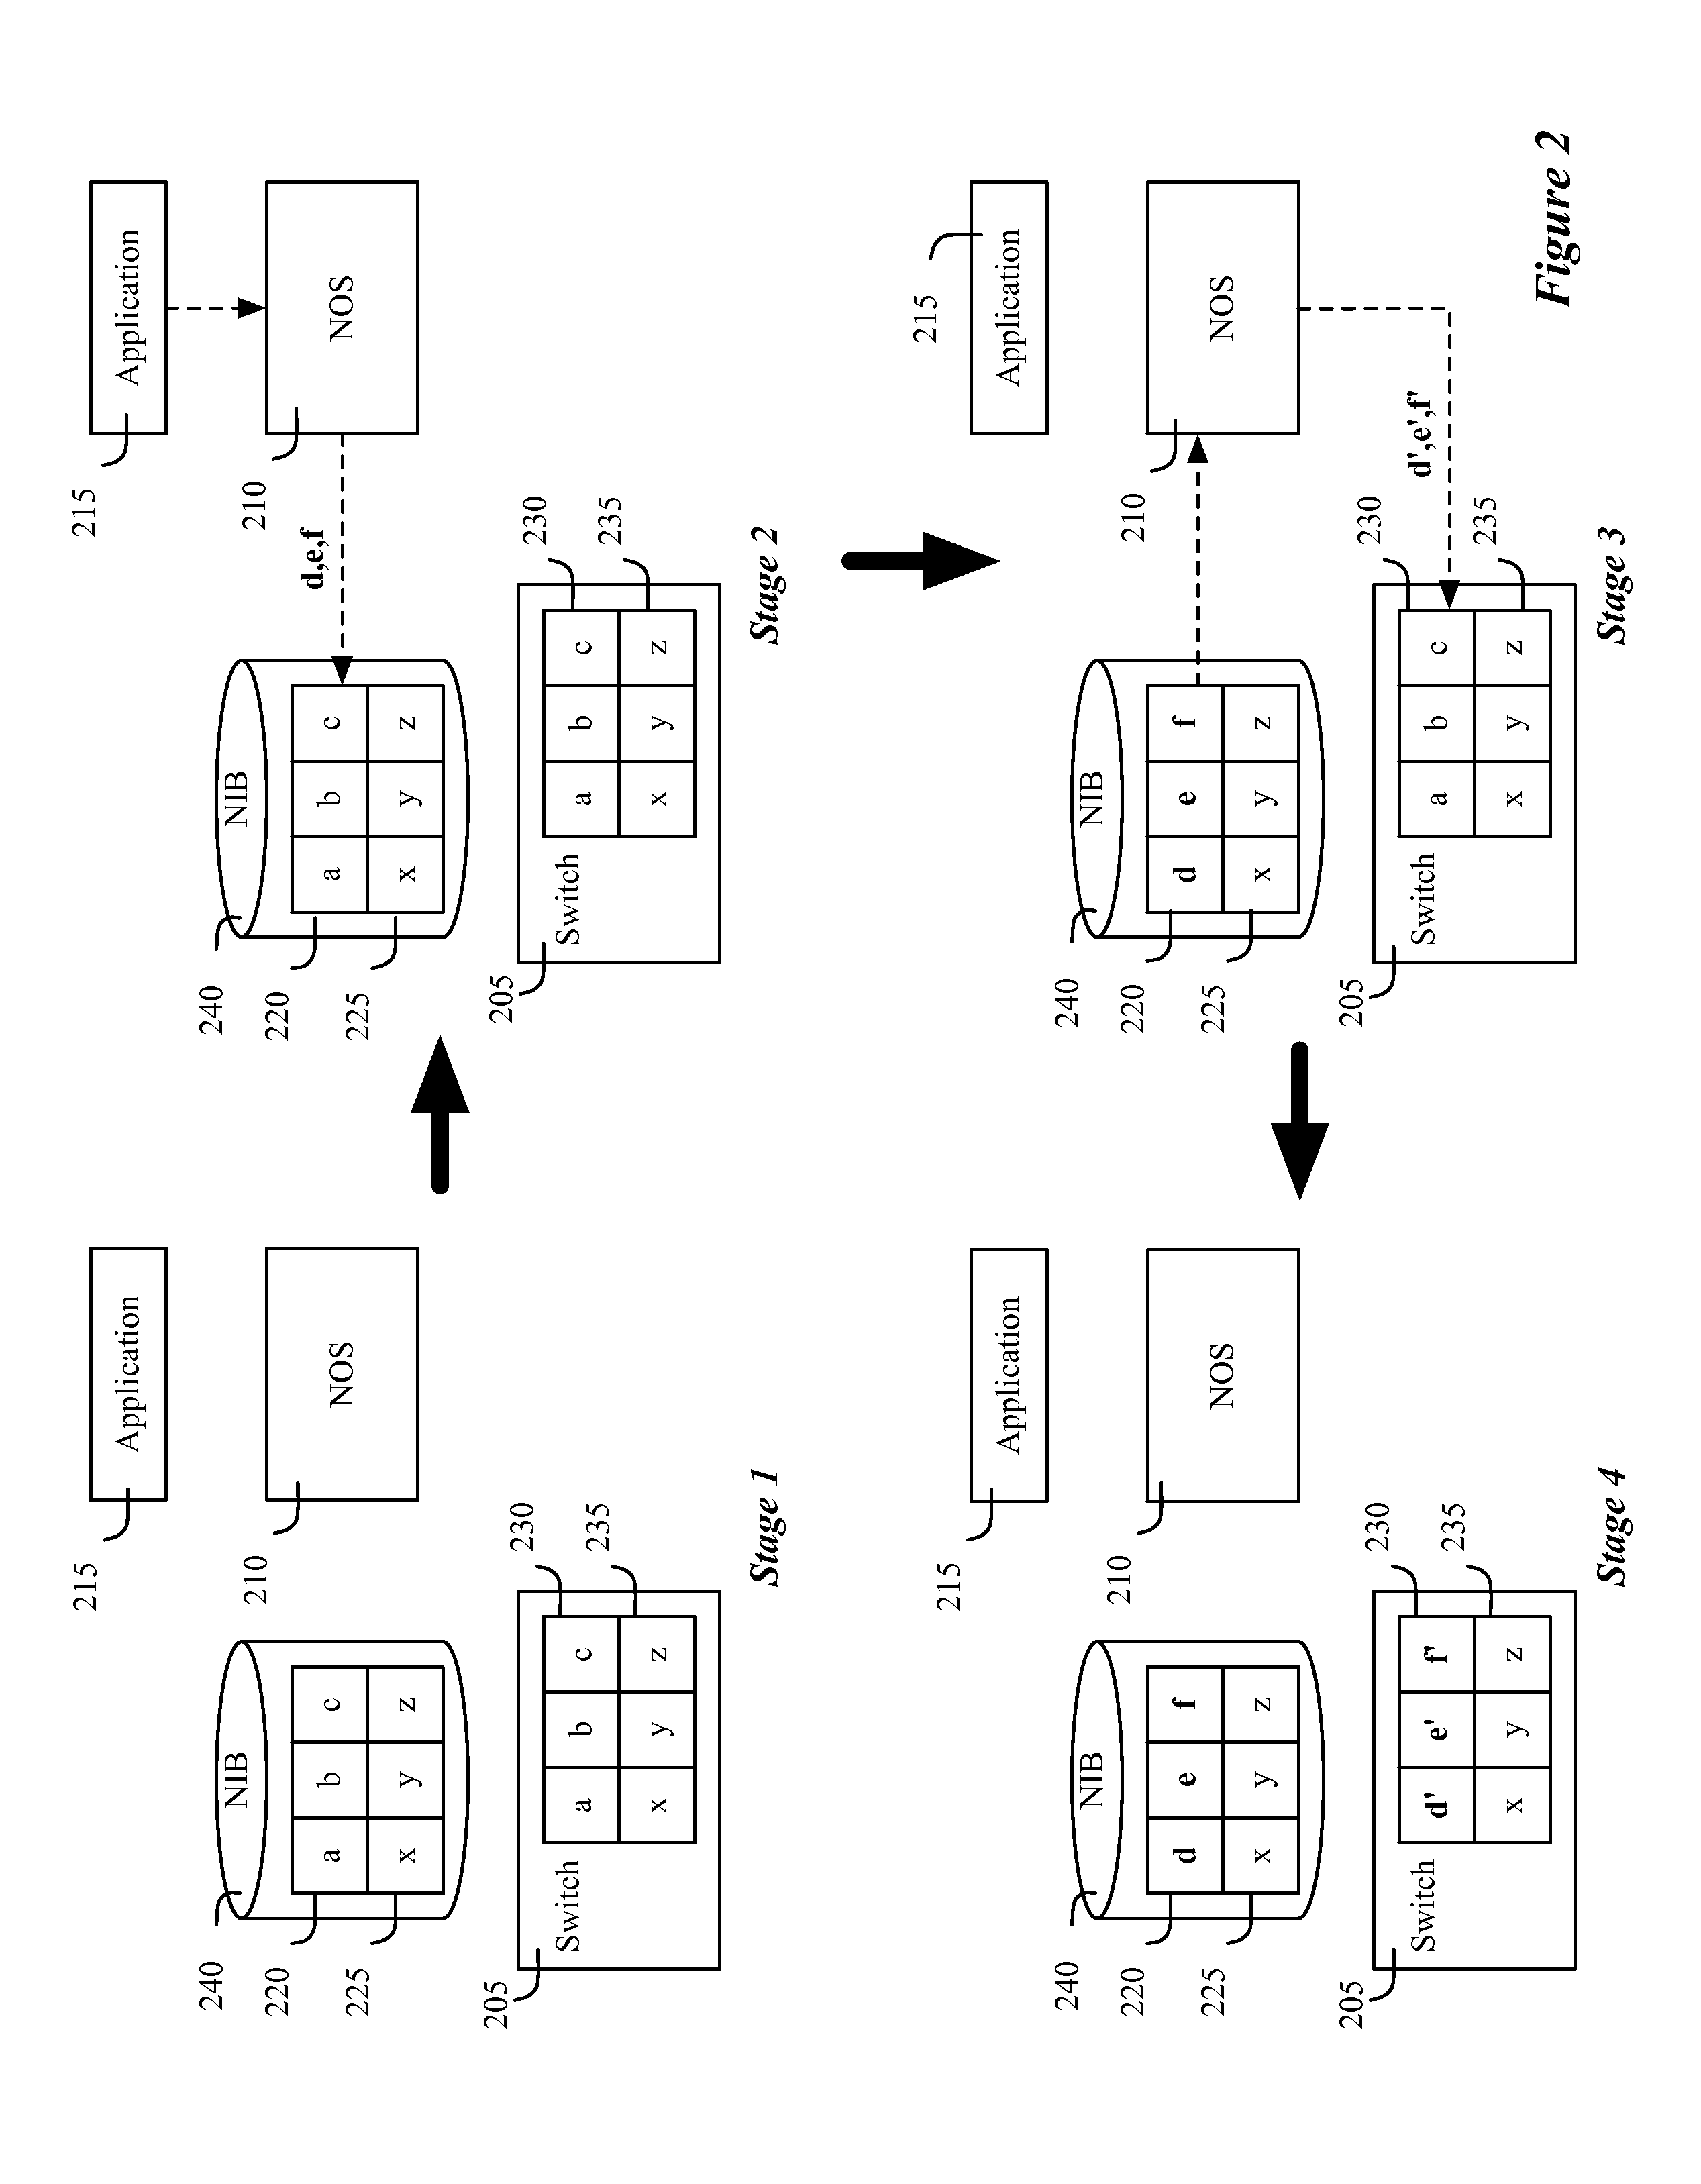 Method and apparatus for interacting with a network information base in a distributed network control system with multiple controller instances